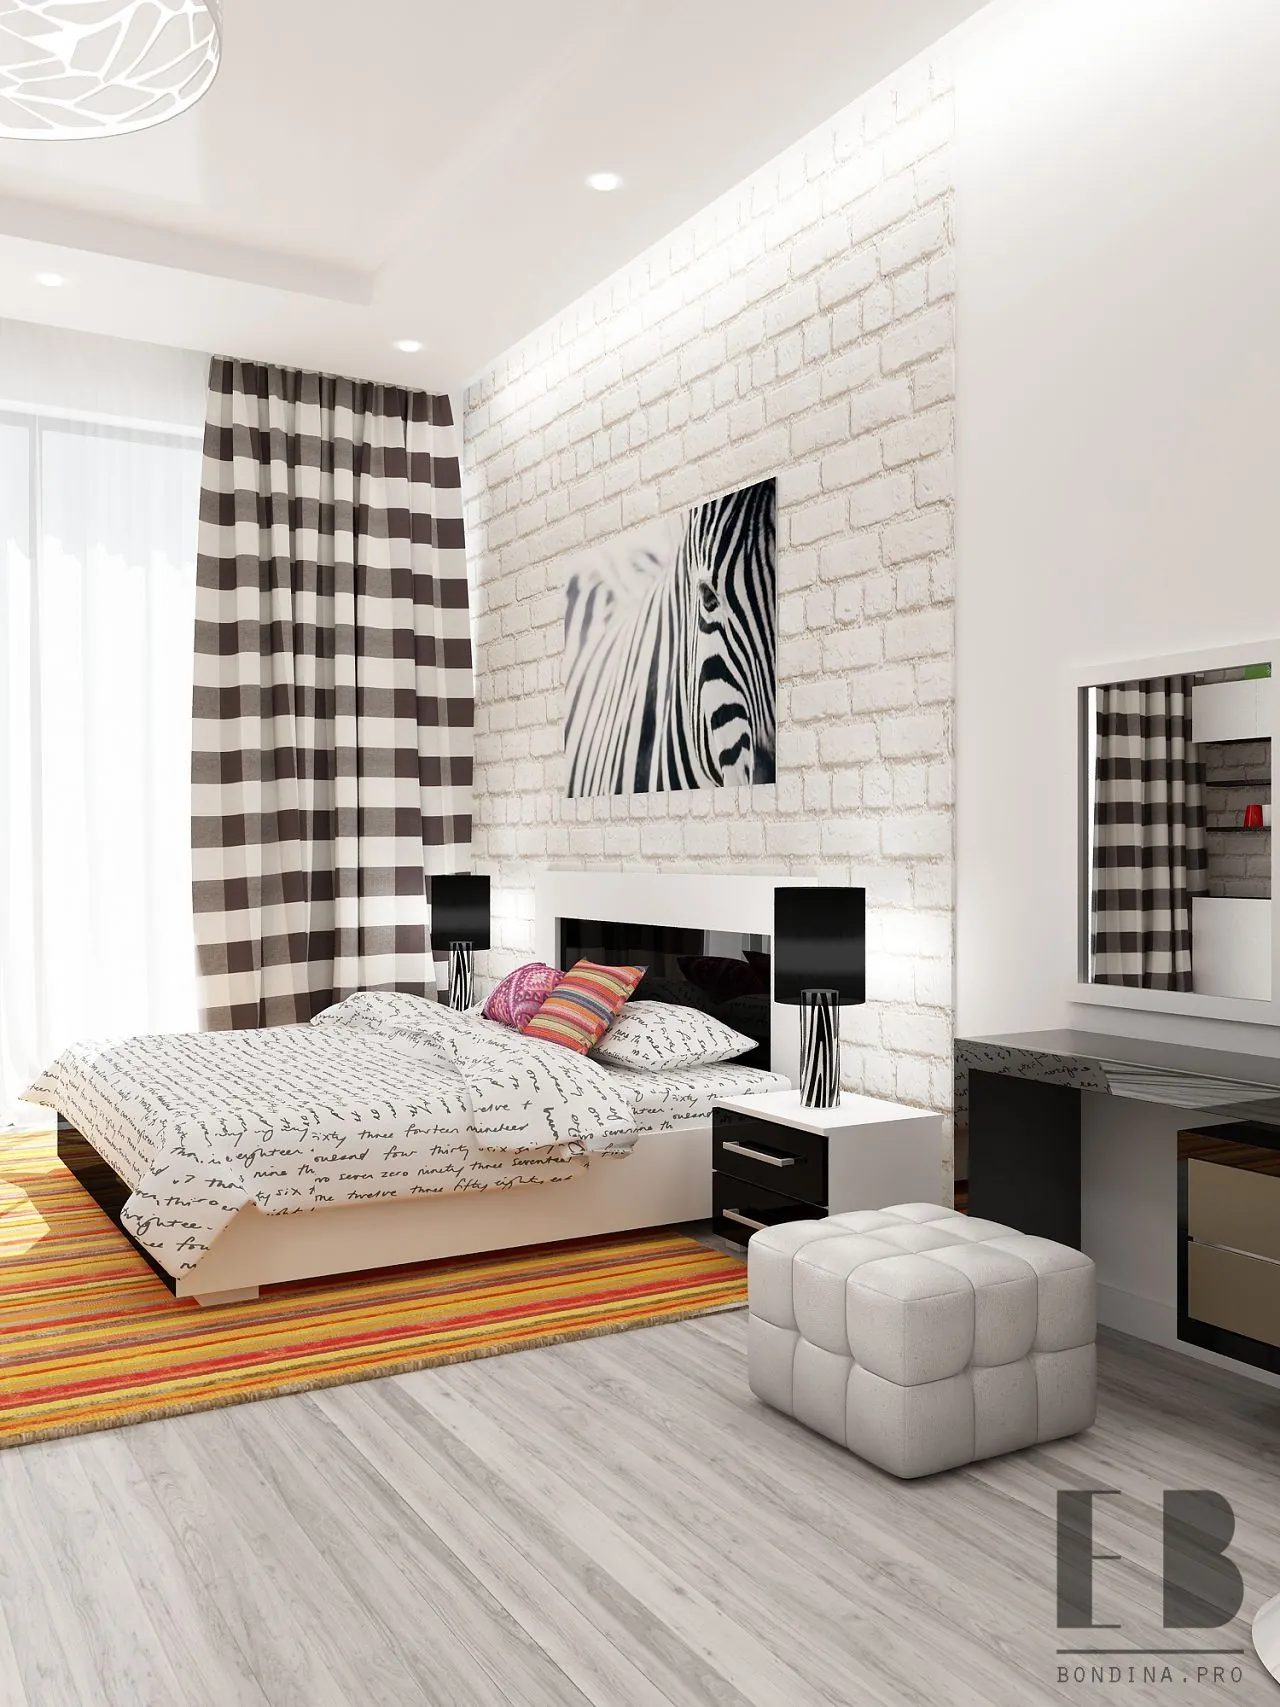 Bedroom with black and white furniture and White bedroom interior with checkered curtains, brick walls